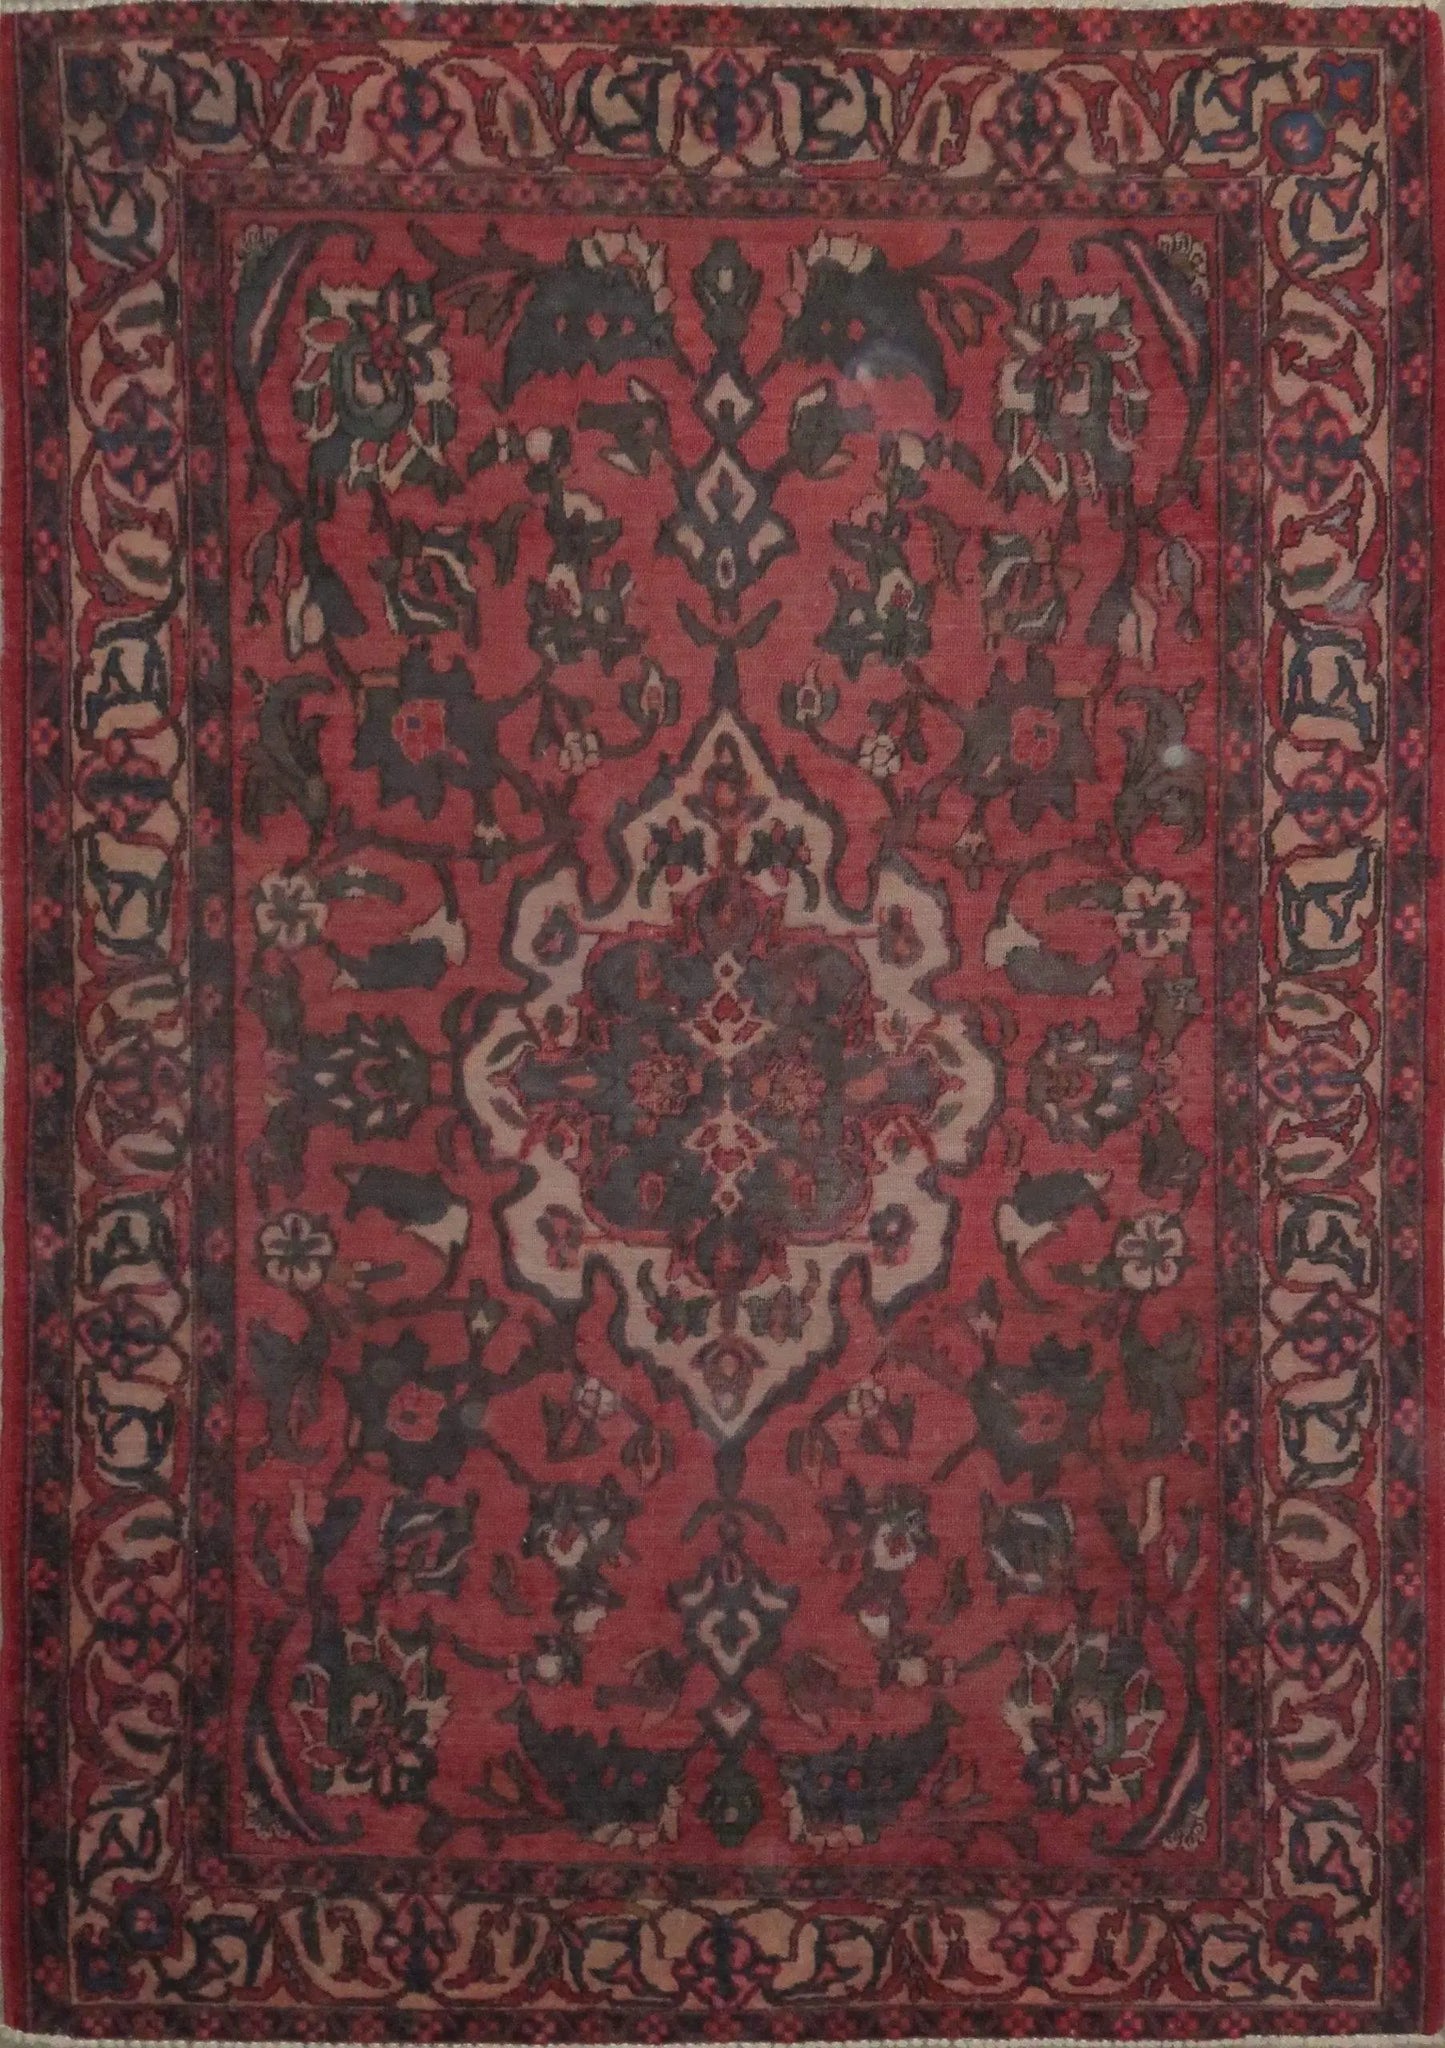 Hand-Knotted Persian Wool Rug _ Luxurious Vintage Design, 6'7" x 4'7", Artisan Crafted